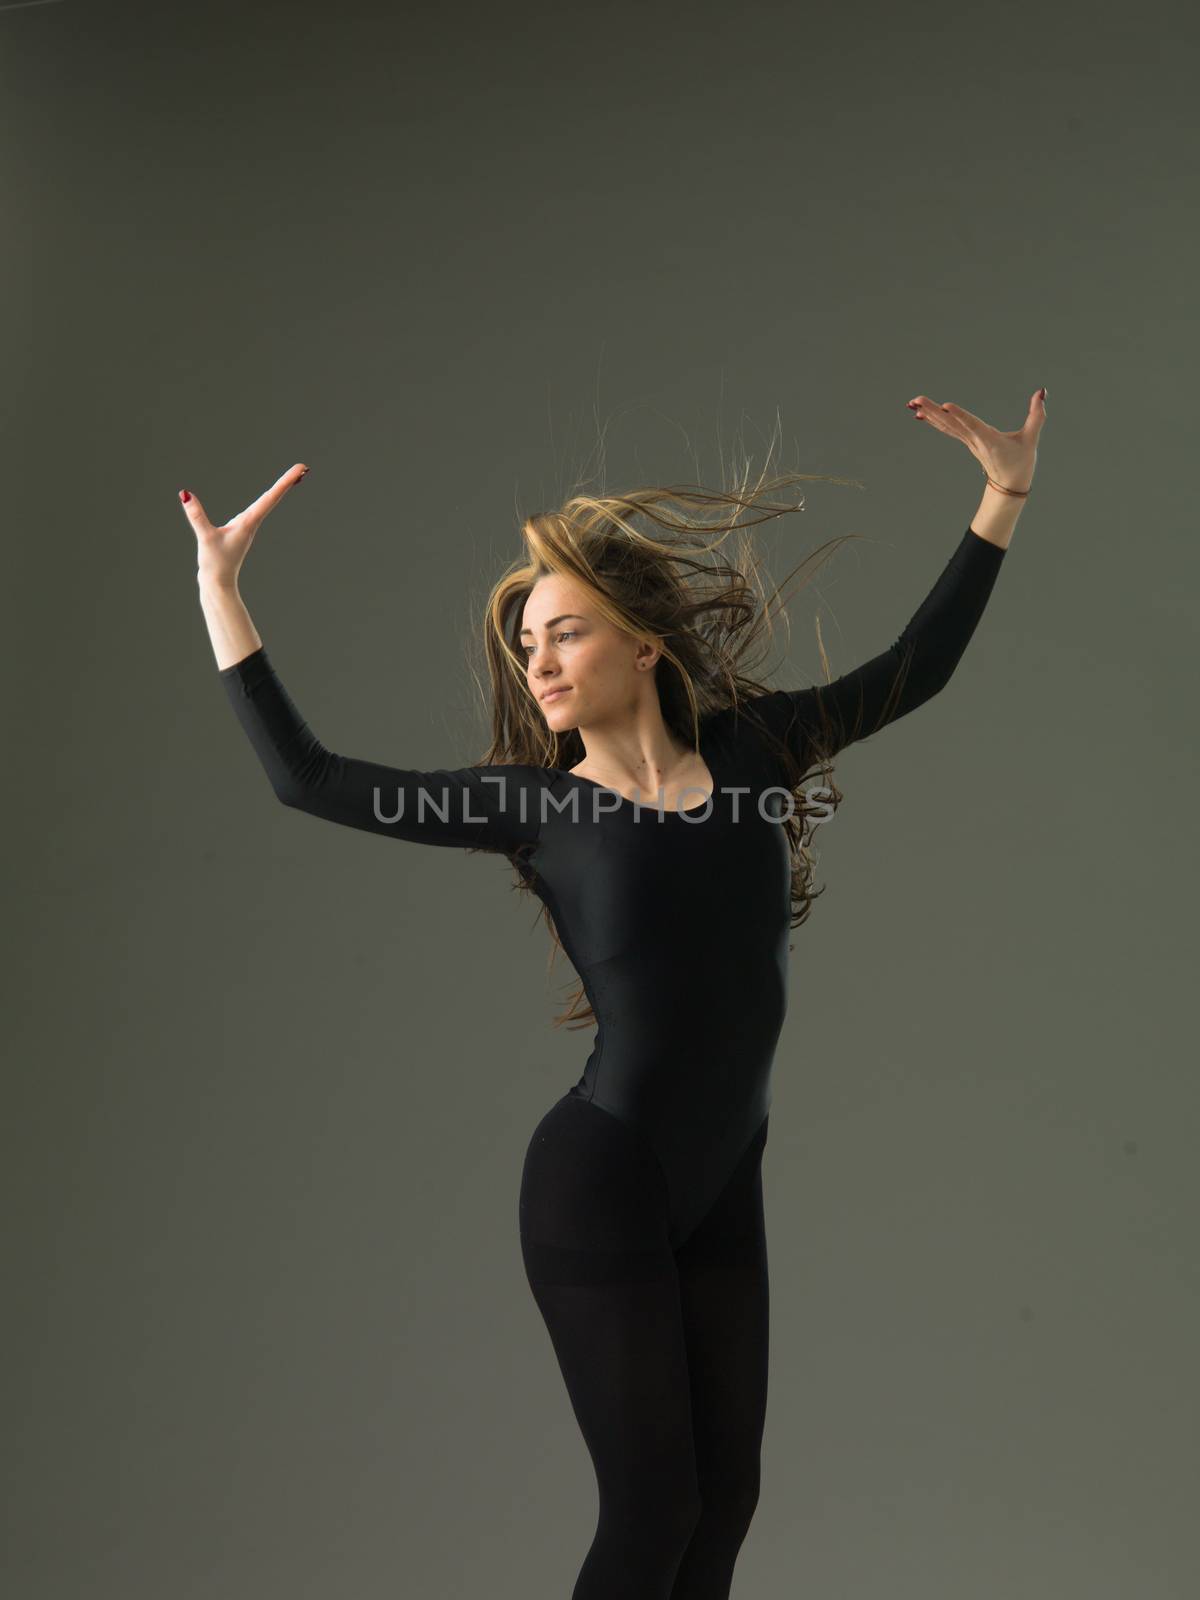 model dancer jumping and posing against grey studio background